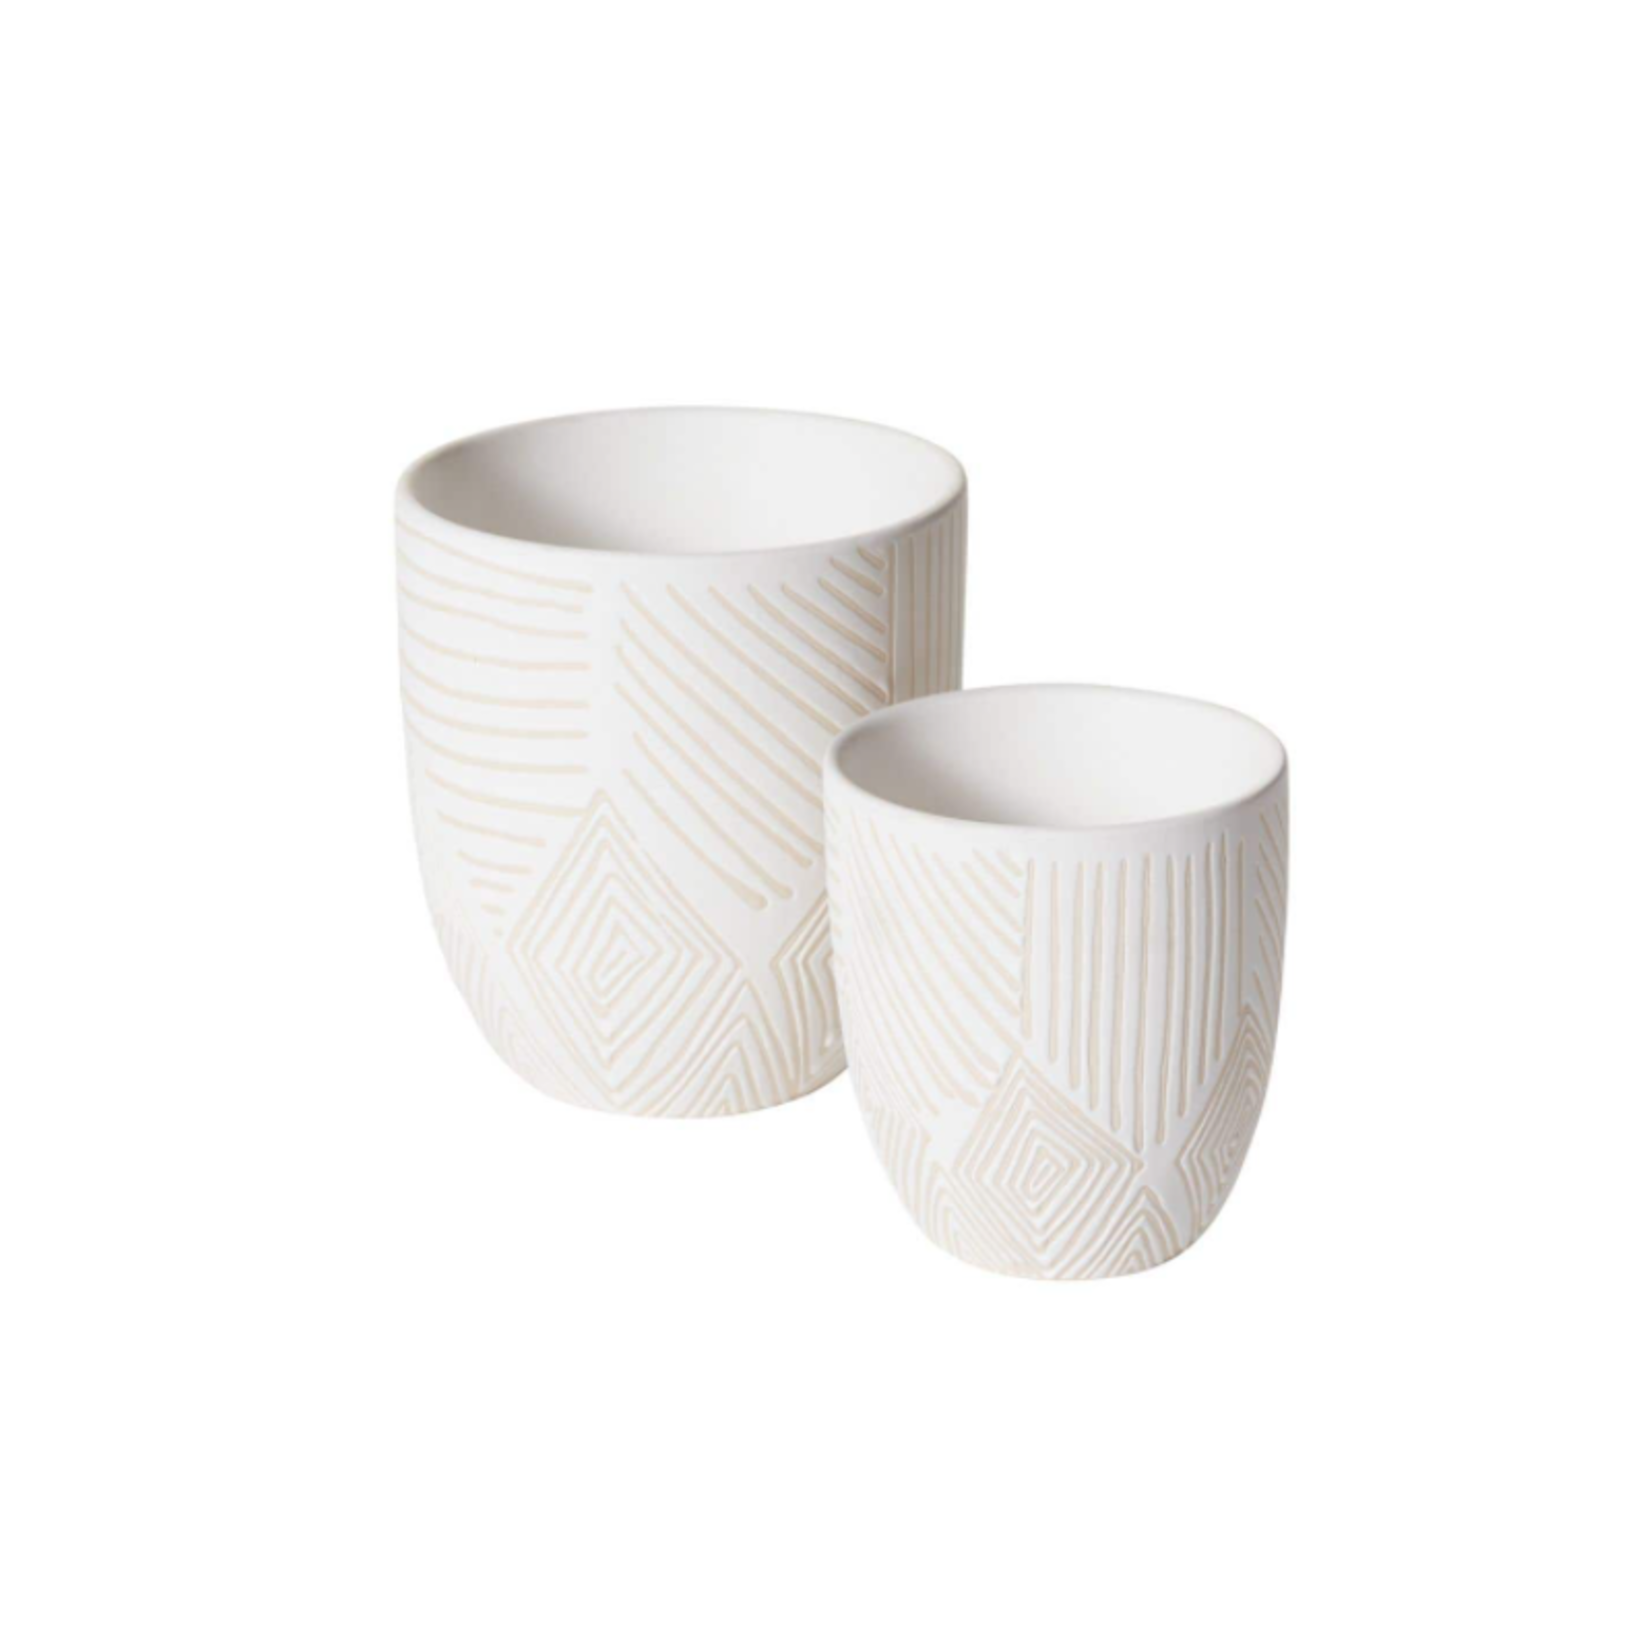 40% off was $20 now $12. 5.75”H X 6” WHITE CERAMIC PFIEFER POT